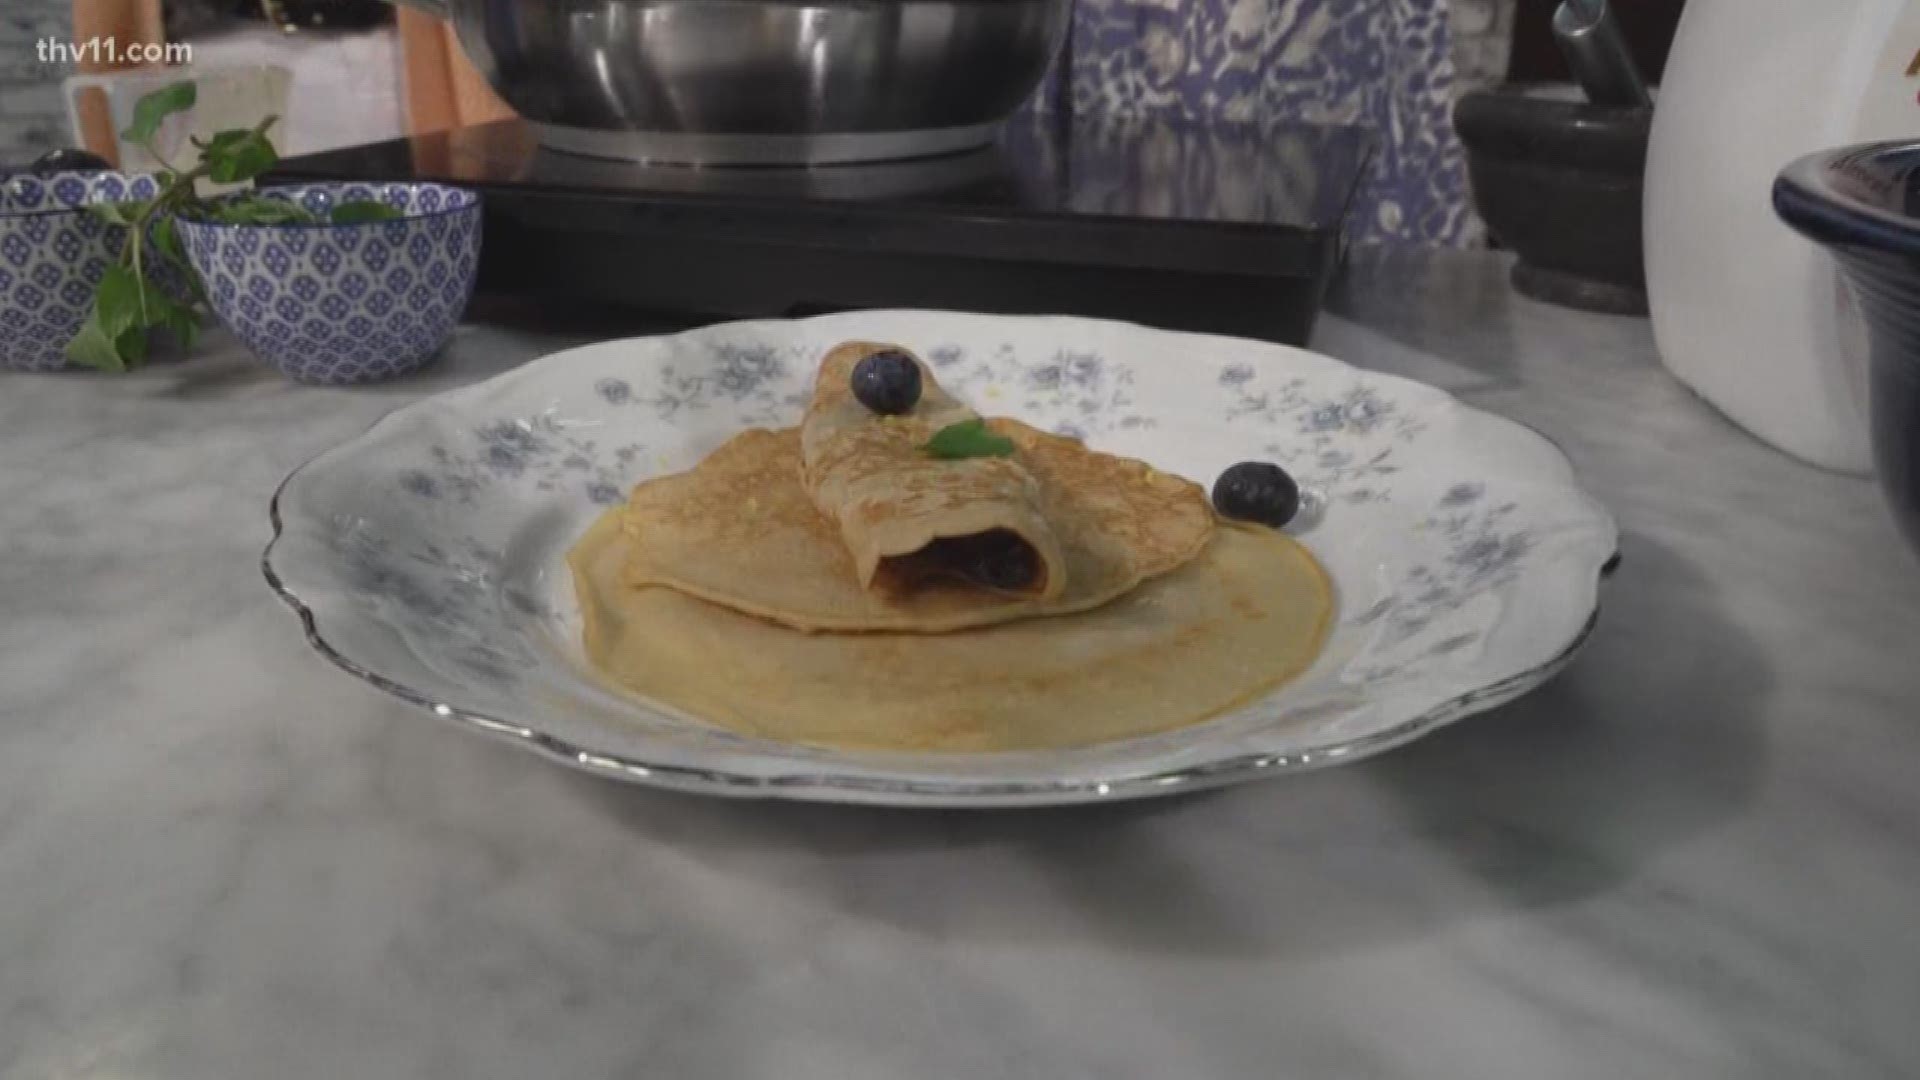 Denise Albert with Cooking in Bloom shared her recipe for kid-friendly crepes!